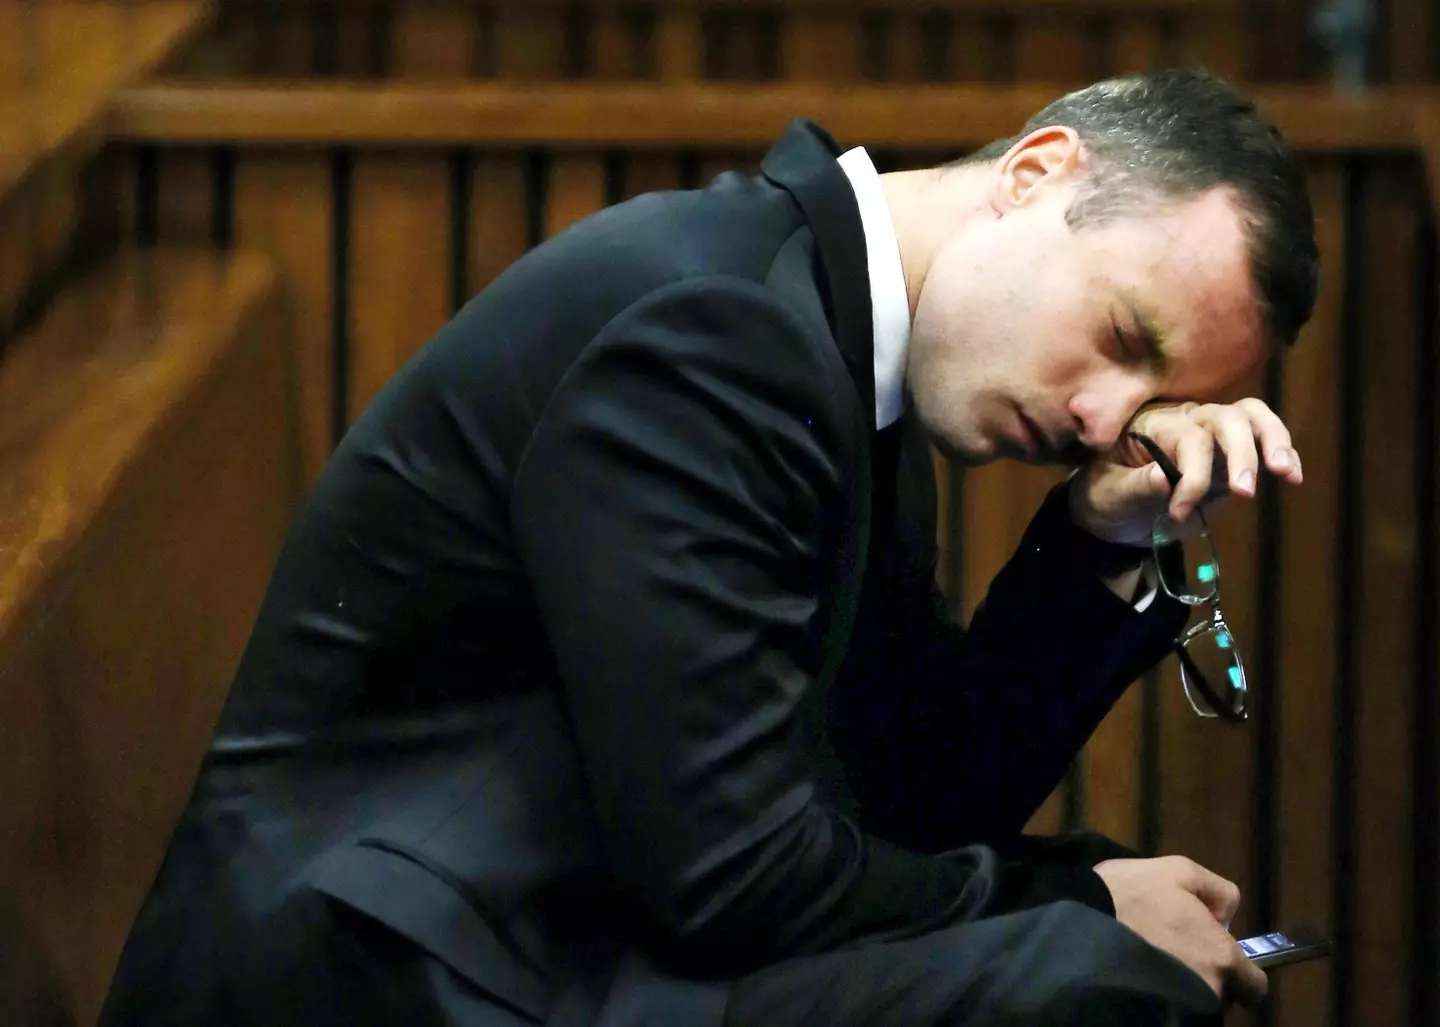 Disgraced Paralympian Oscar Pistorius will remain in prison after being denied parole.